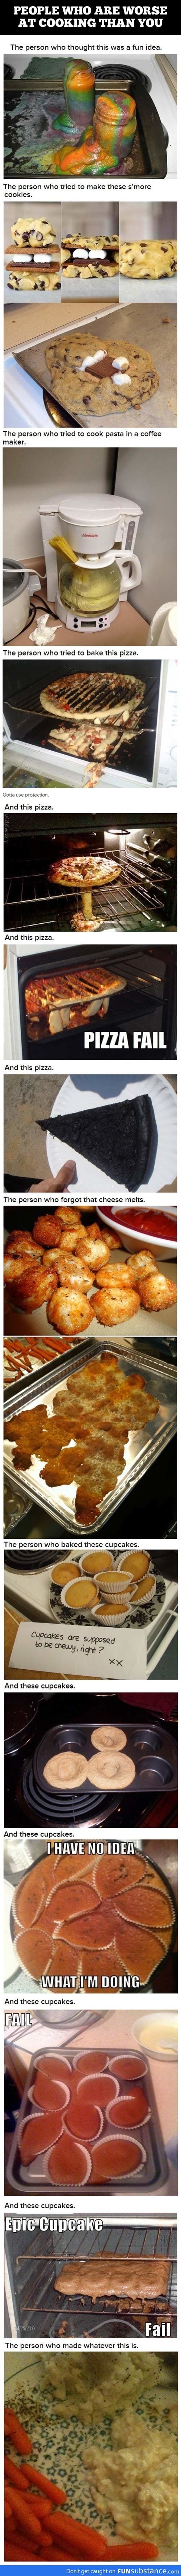 People who suck at cooking